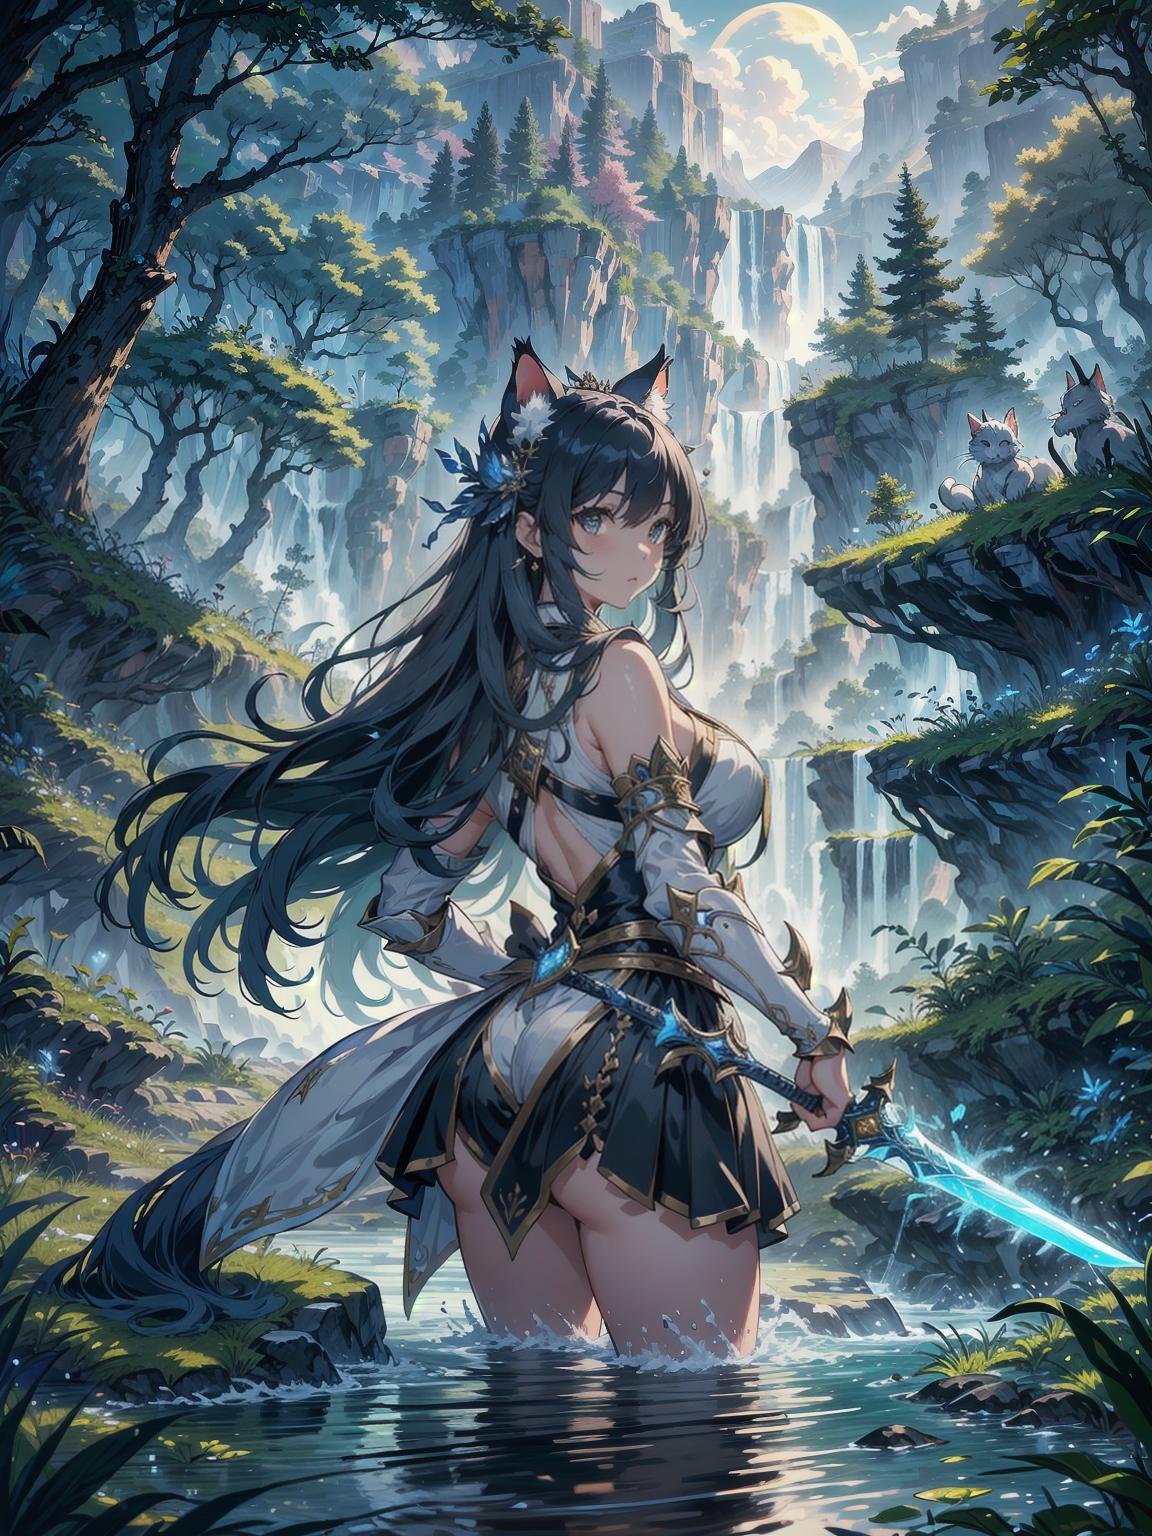  master piece, best quality, ultra detailed, highres, 4k.8k, Royal Knight, Cat eared girl, Amazoness, Holding a sacred sword with water attribute power., Majestic and determined., BREAK A beautiful royal knight with cat ears and an Amazoness holding a sacred sword with water attribute power is depicted., Enchanted forest clearing near a flowing river., Sacred sword, flowing river, enchanted forest, moonlight, BREAK Mysterious and enchanting, Moonlight shining on the characters, enhancing the magical atmosphere., holding sword